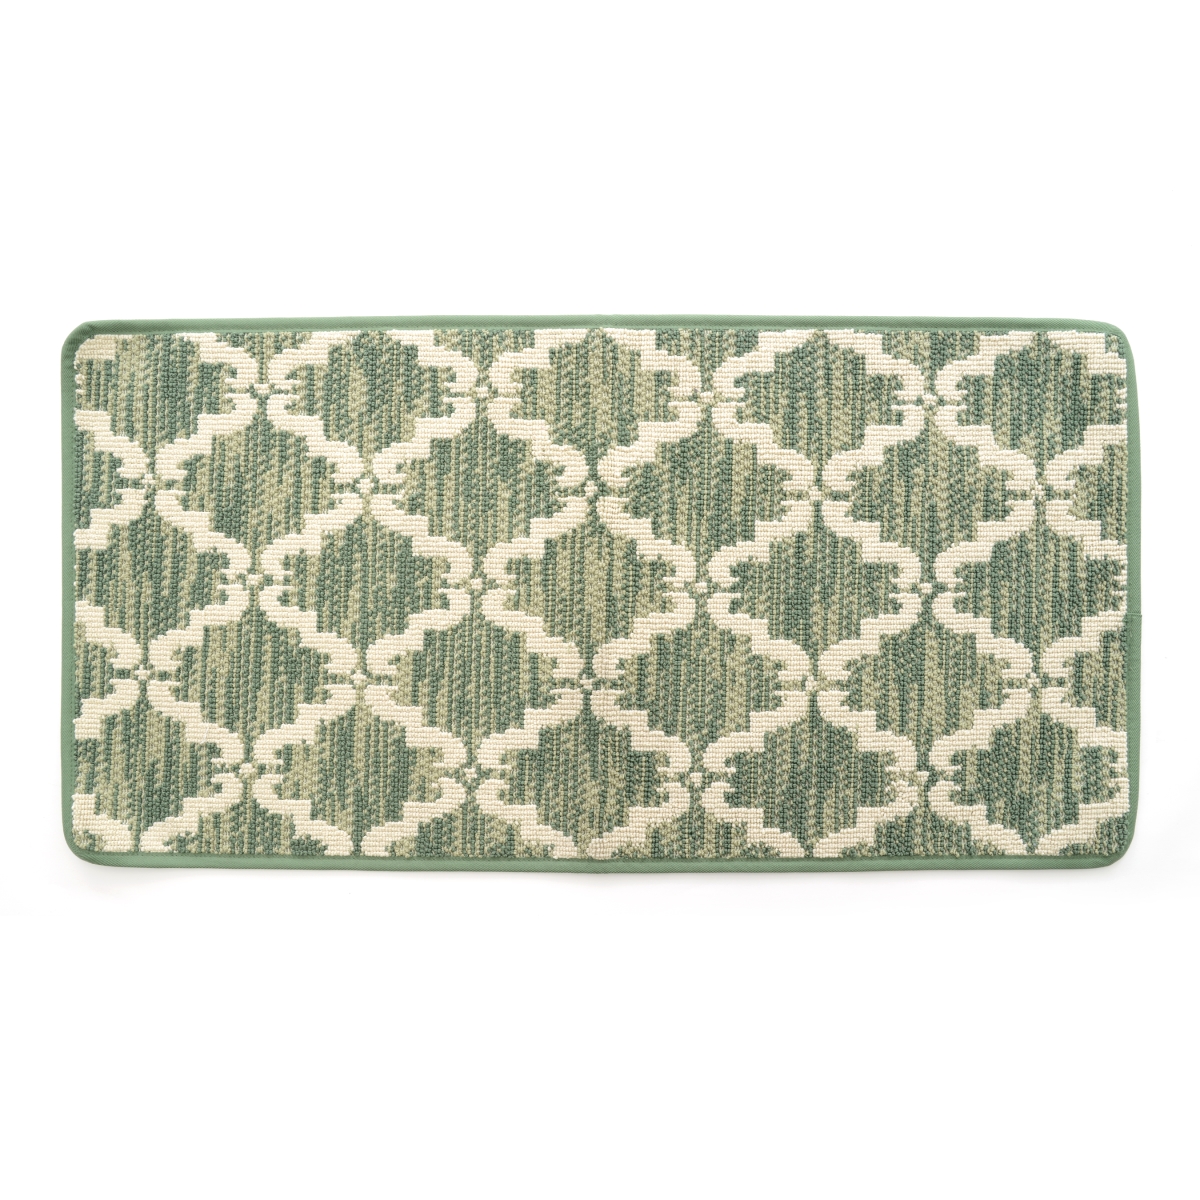 39n-kpl229-12 20 X 39 In. Ultra Plush Pacific Knitted Loop Pile Polyester Bath Mat - Green